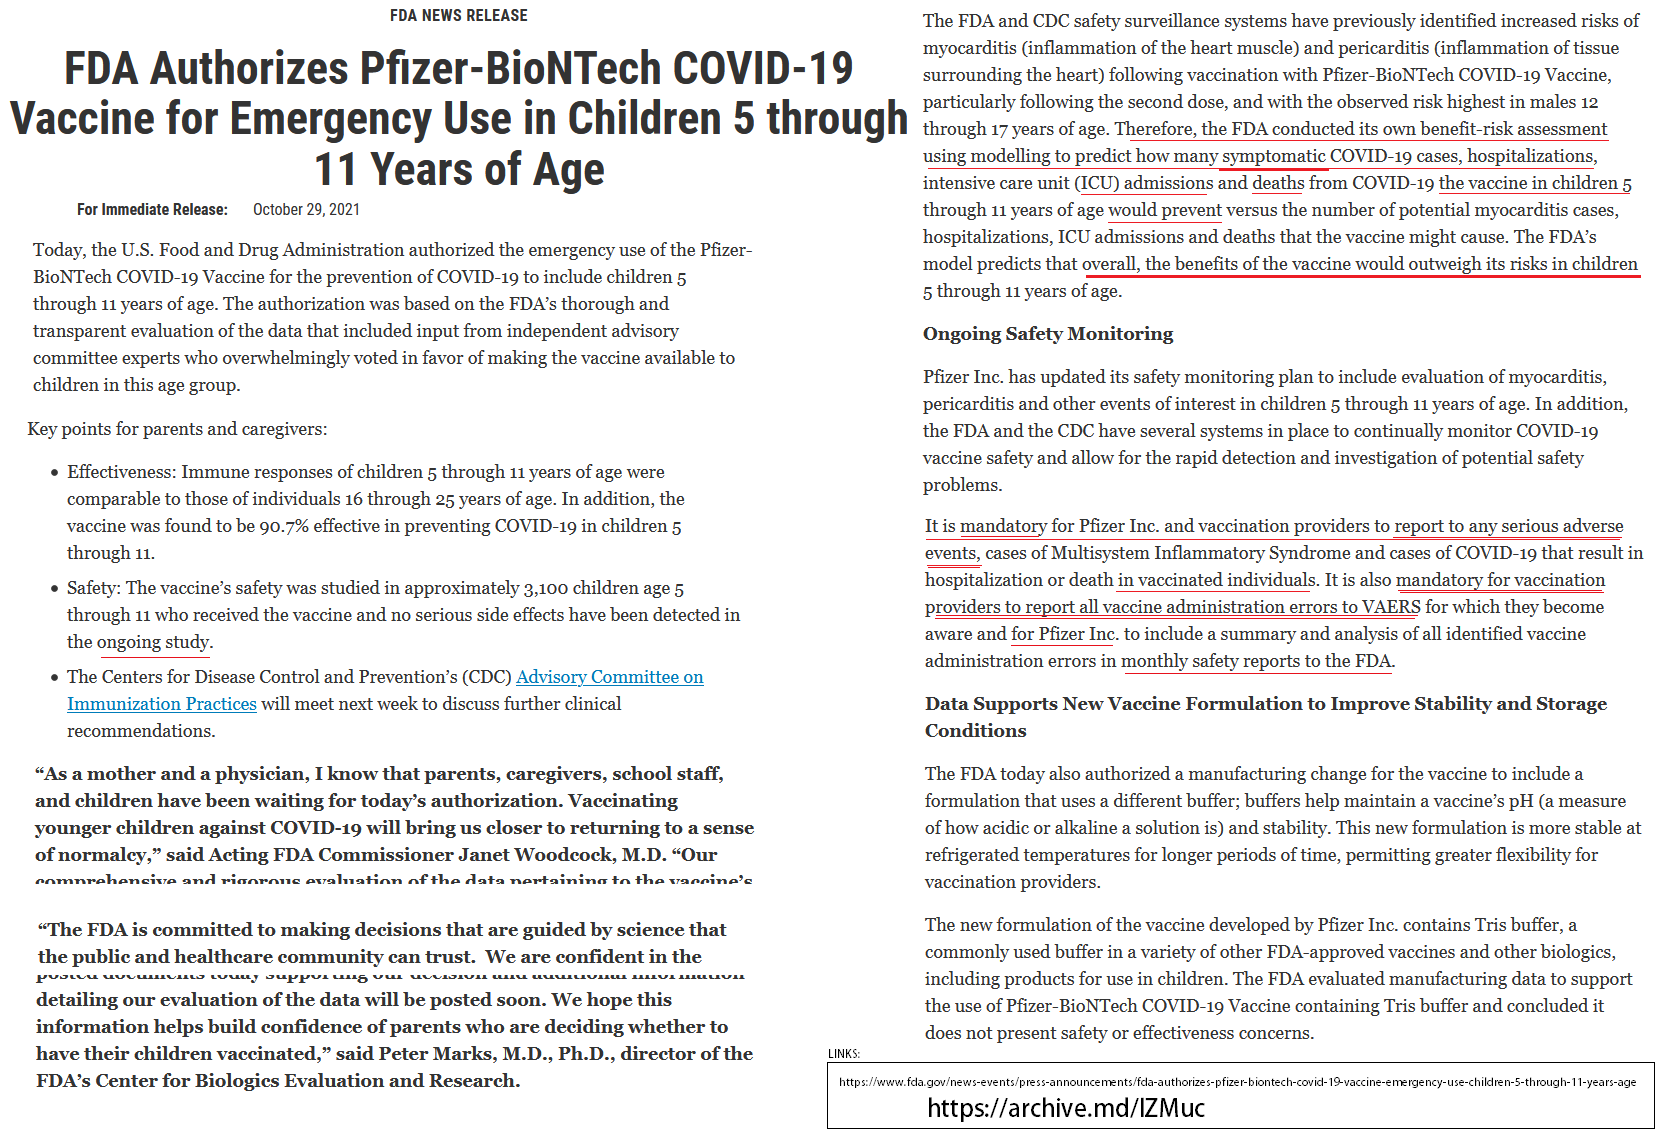 10_29_2021 FDA approves Child Vaccination for Pfizer Covid Vax.png